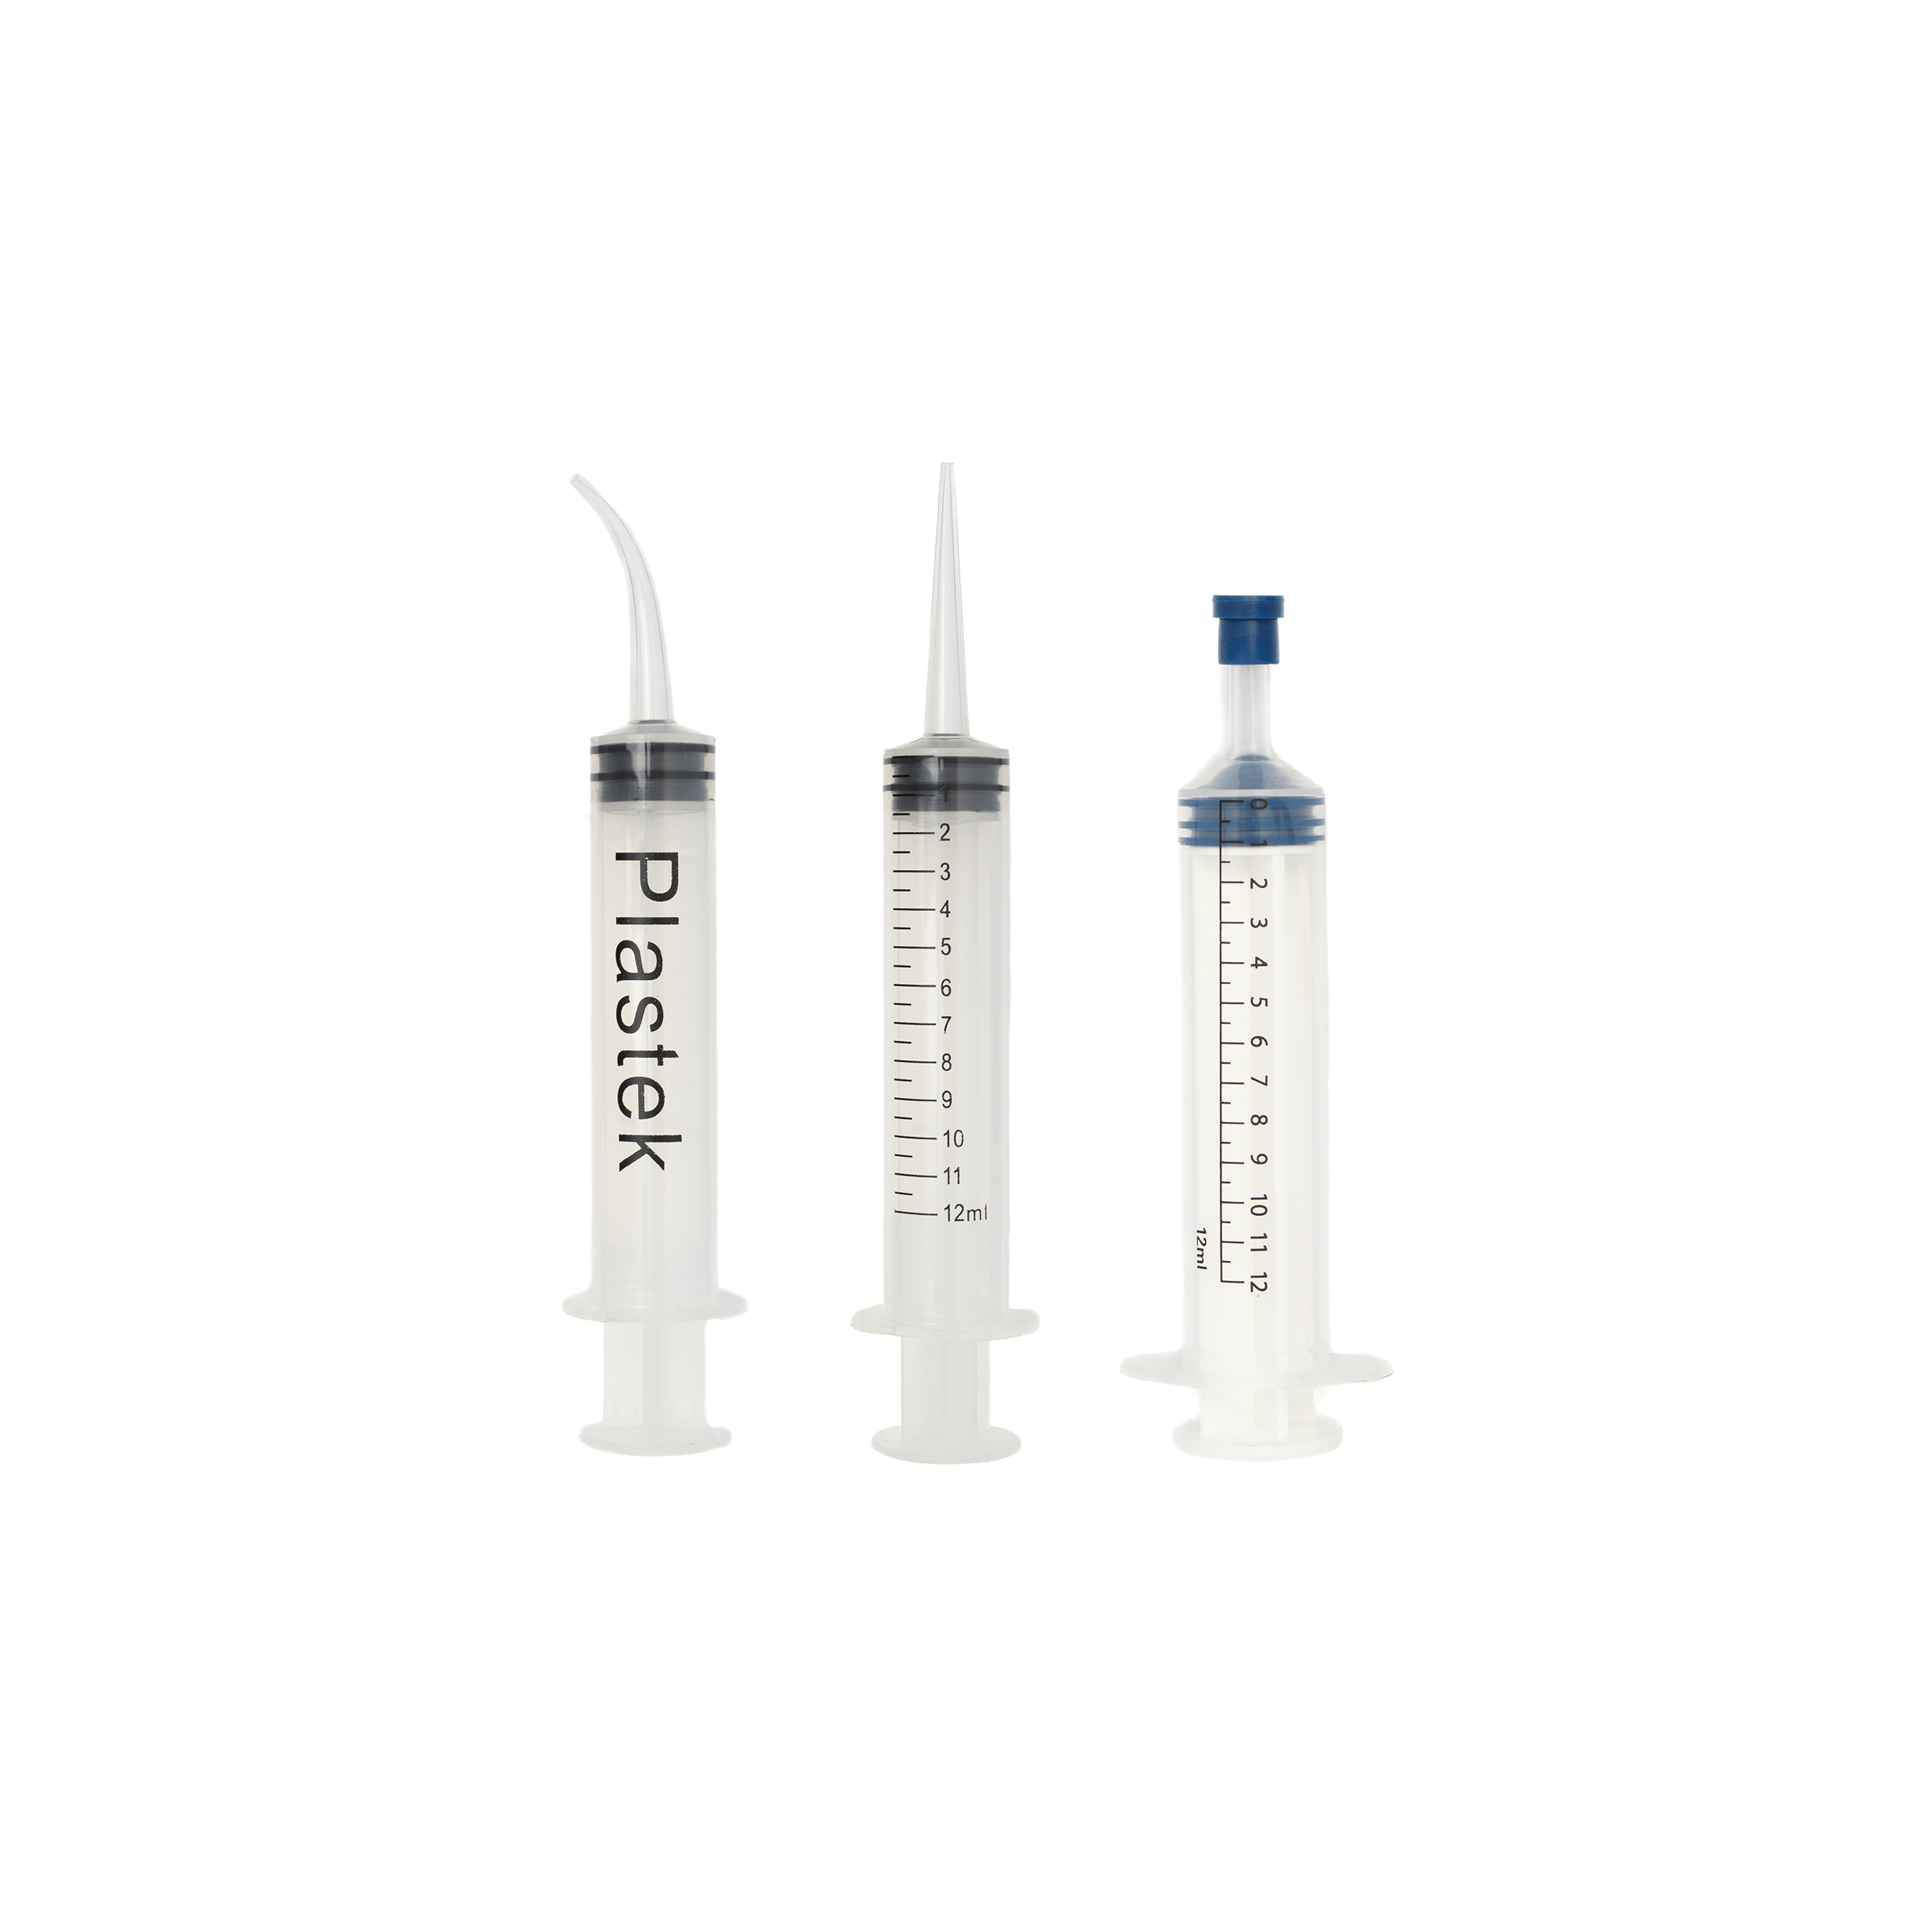 Image of all three syringes side by side. Left to right: P-18, P-18-STR, P-12ML-SYR-LL-C.